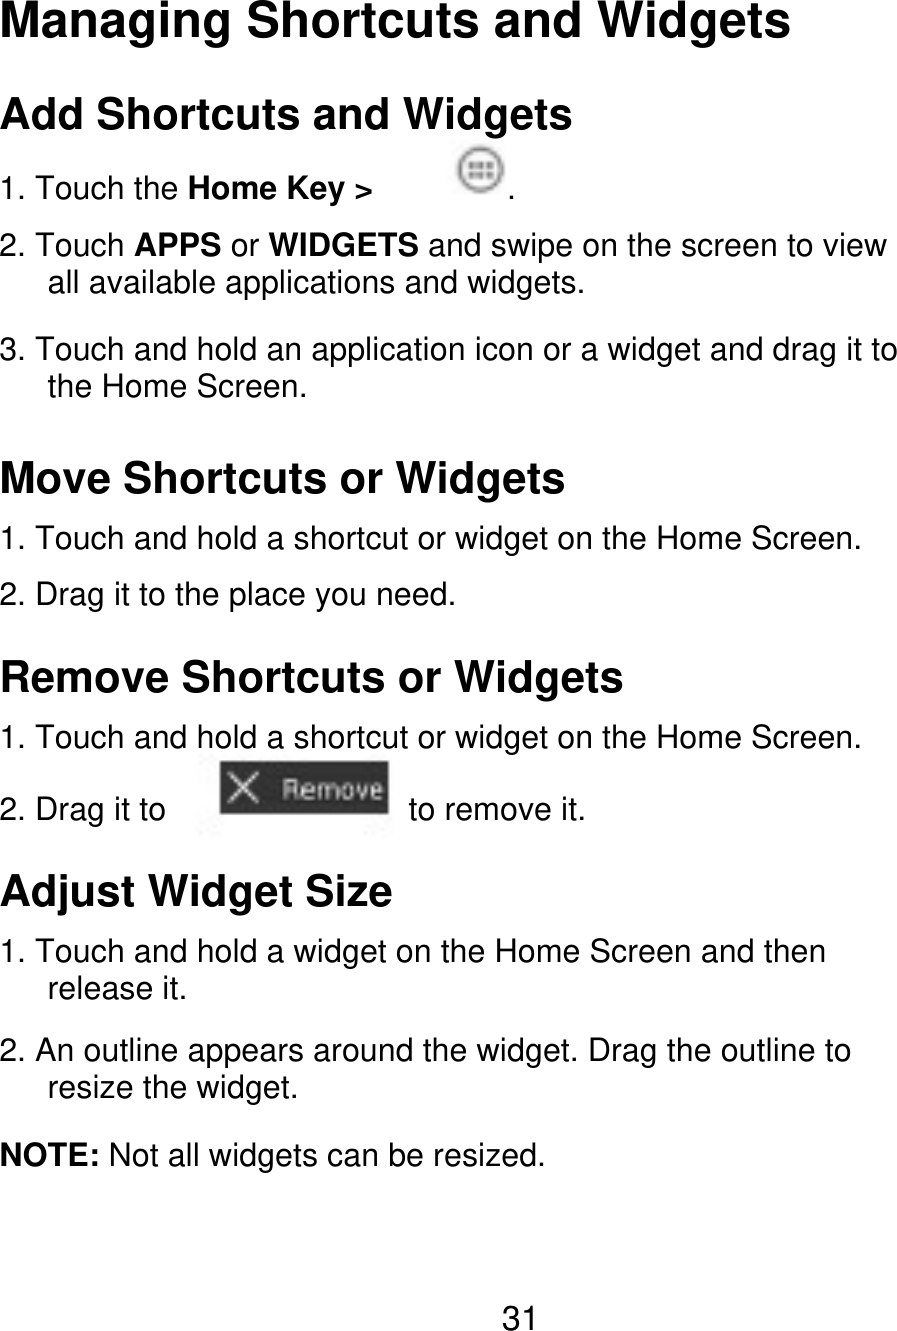 Managing Shortcuts and Widgets Add Shortcuts and Widgets 1. Touch the Home Key &gt; . 2. Touch APPS or WIDGETS and swipe on the screen to view    all available applications and widgets. 3. Touch and hold an application icon or a widget and drag it to    the Home Screen. Move Shortcuts or Widgets 1. Touch and hold a shortcut or widget on the Home Screen. 2. Drag it to the place you need. Remove Shortcuts or Widgets 1. Touch and hold a shortcut or widget on the Home Screen. 2. Drag it to to remove it. Adjust Widget Size 1. Touch and hold a widget on the Home Screen and then    release it. 2. An outline appears around the widget. Drag the outline to    resize the widget. NOTE: Not all widgets can be resized. 31 